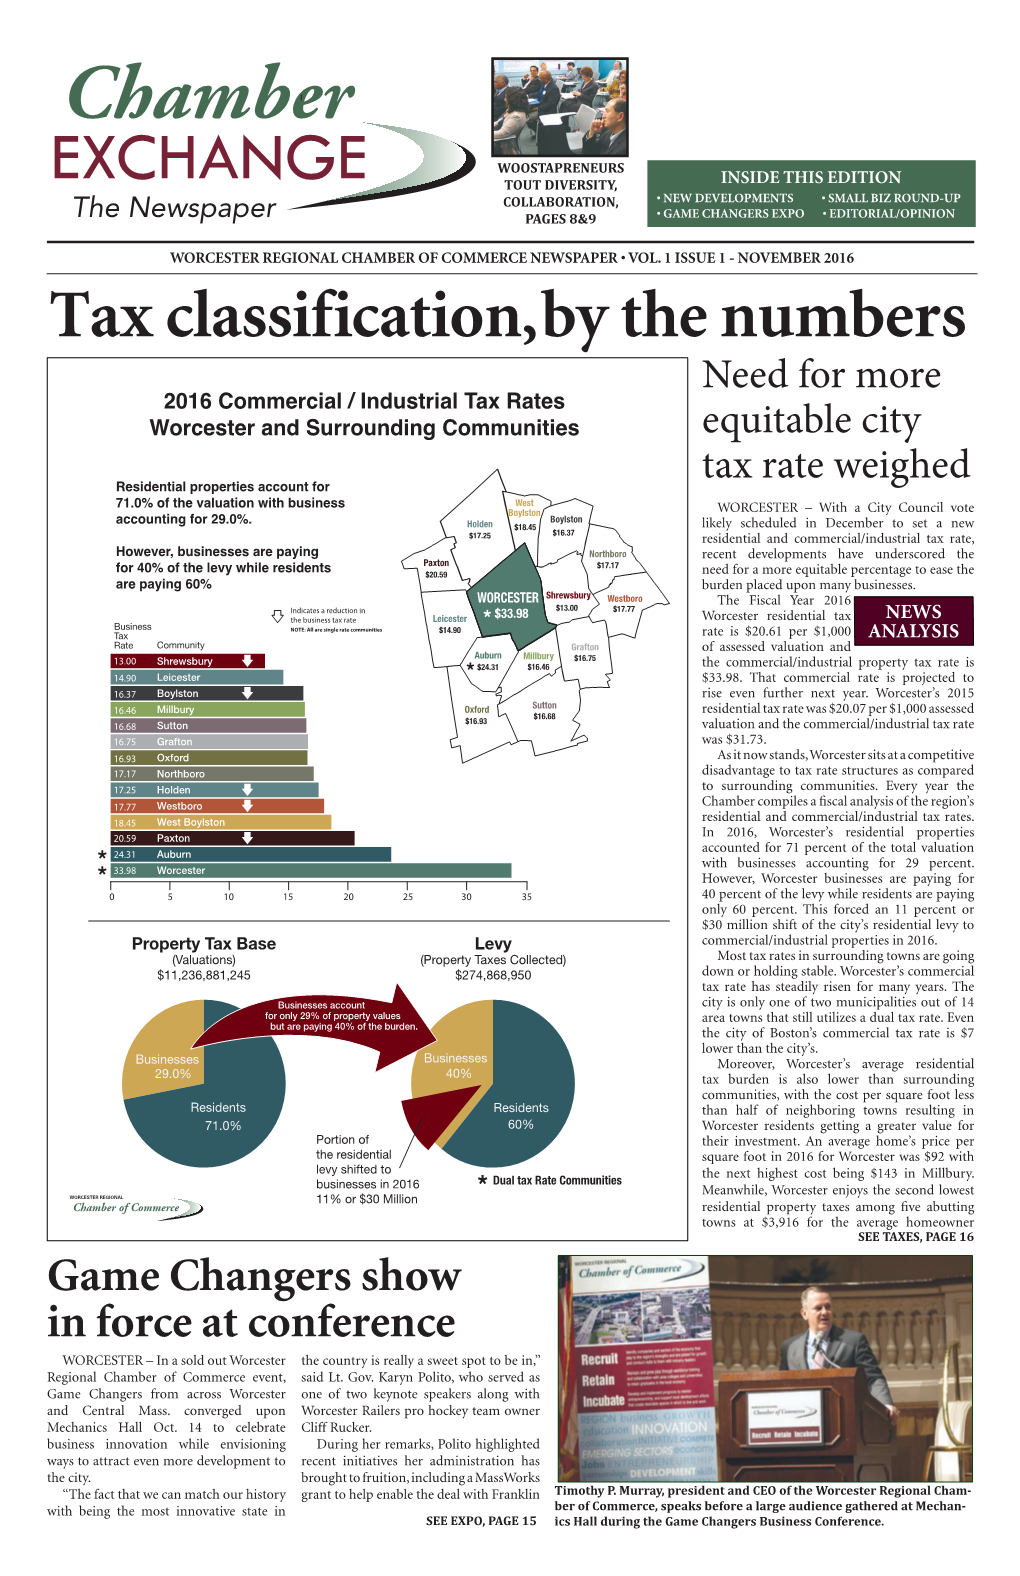 NOVEMBER 2016 Tax Classification, by the Numbers Need for More 2016 Commercial / Industrial Tax Rates Worcester and Surrounding Communities Equitable City